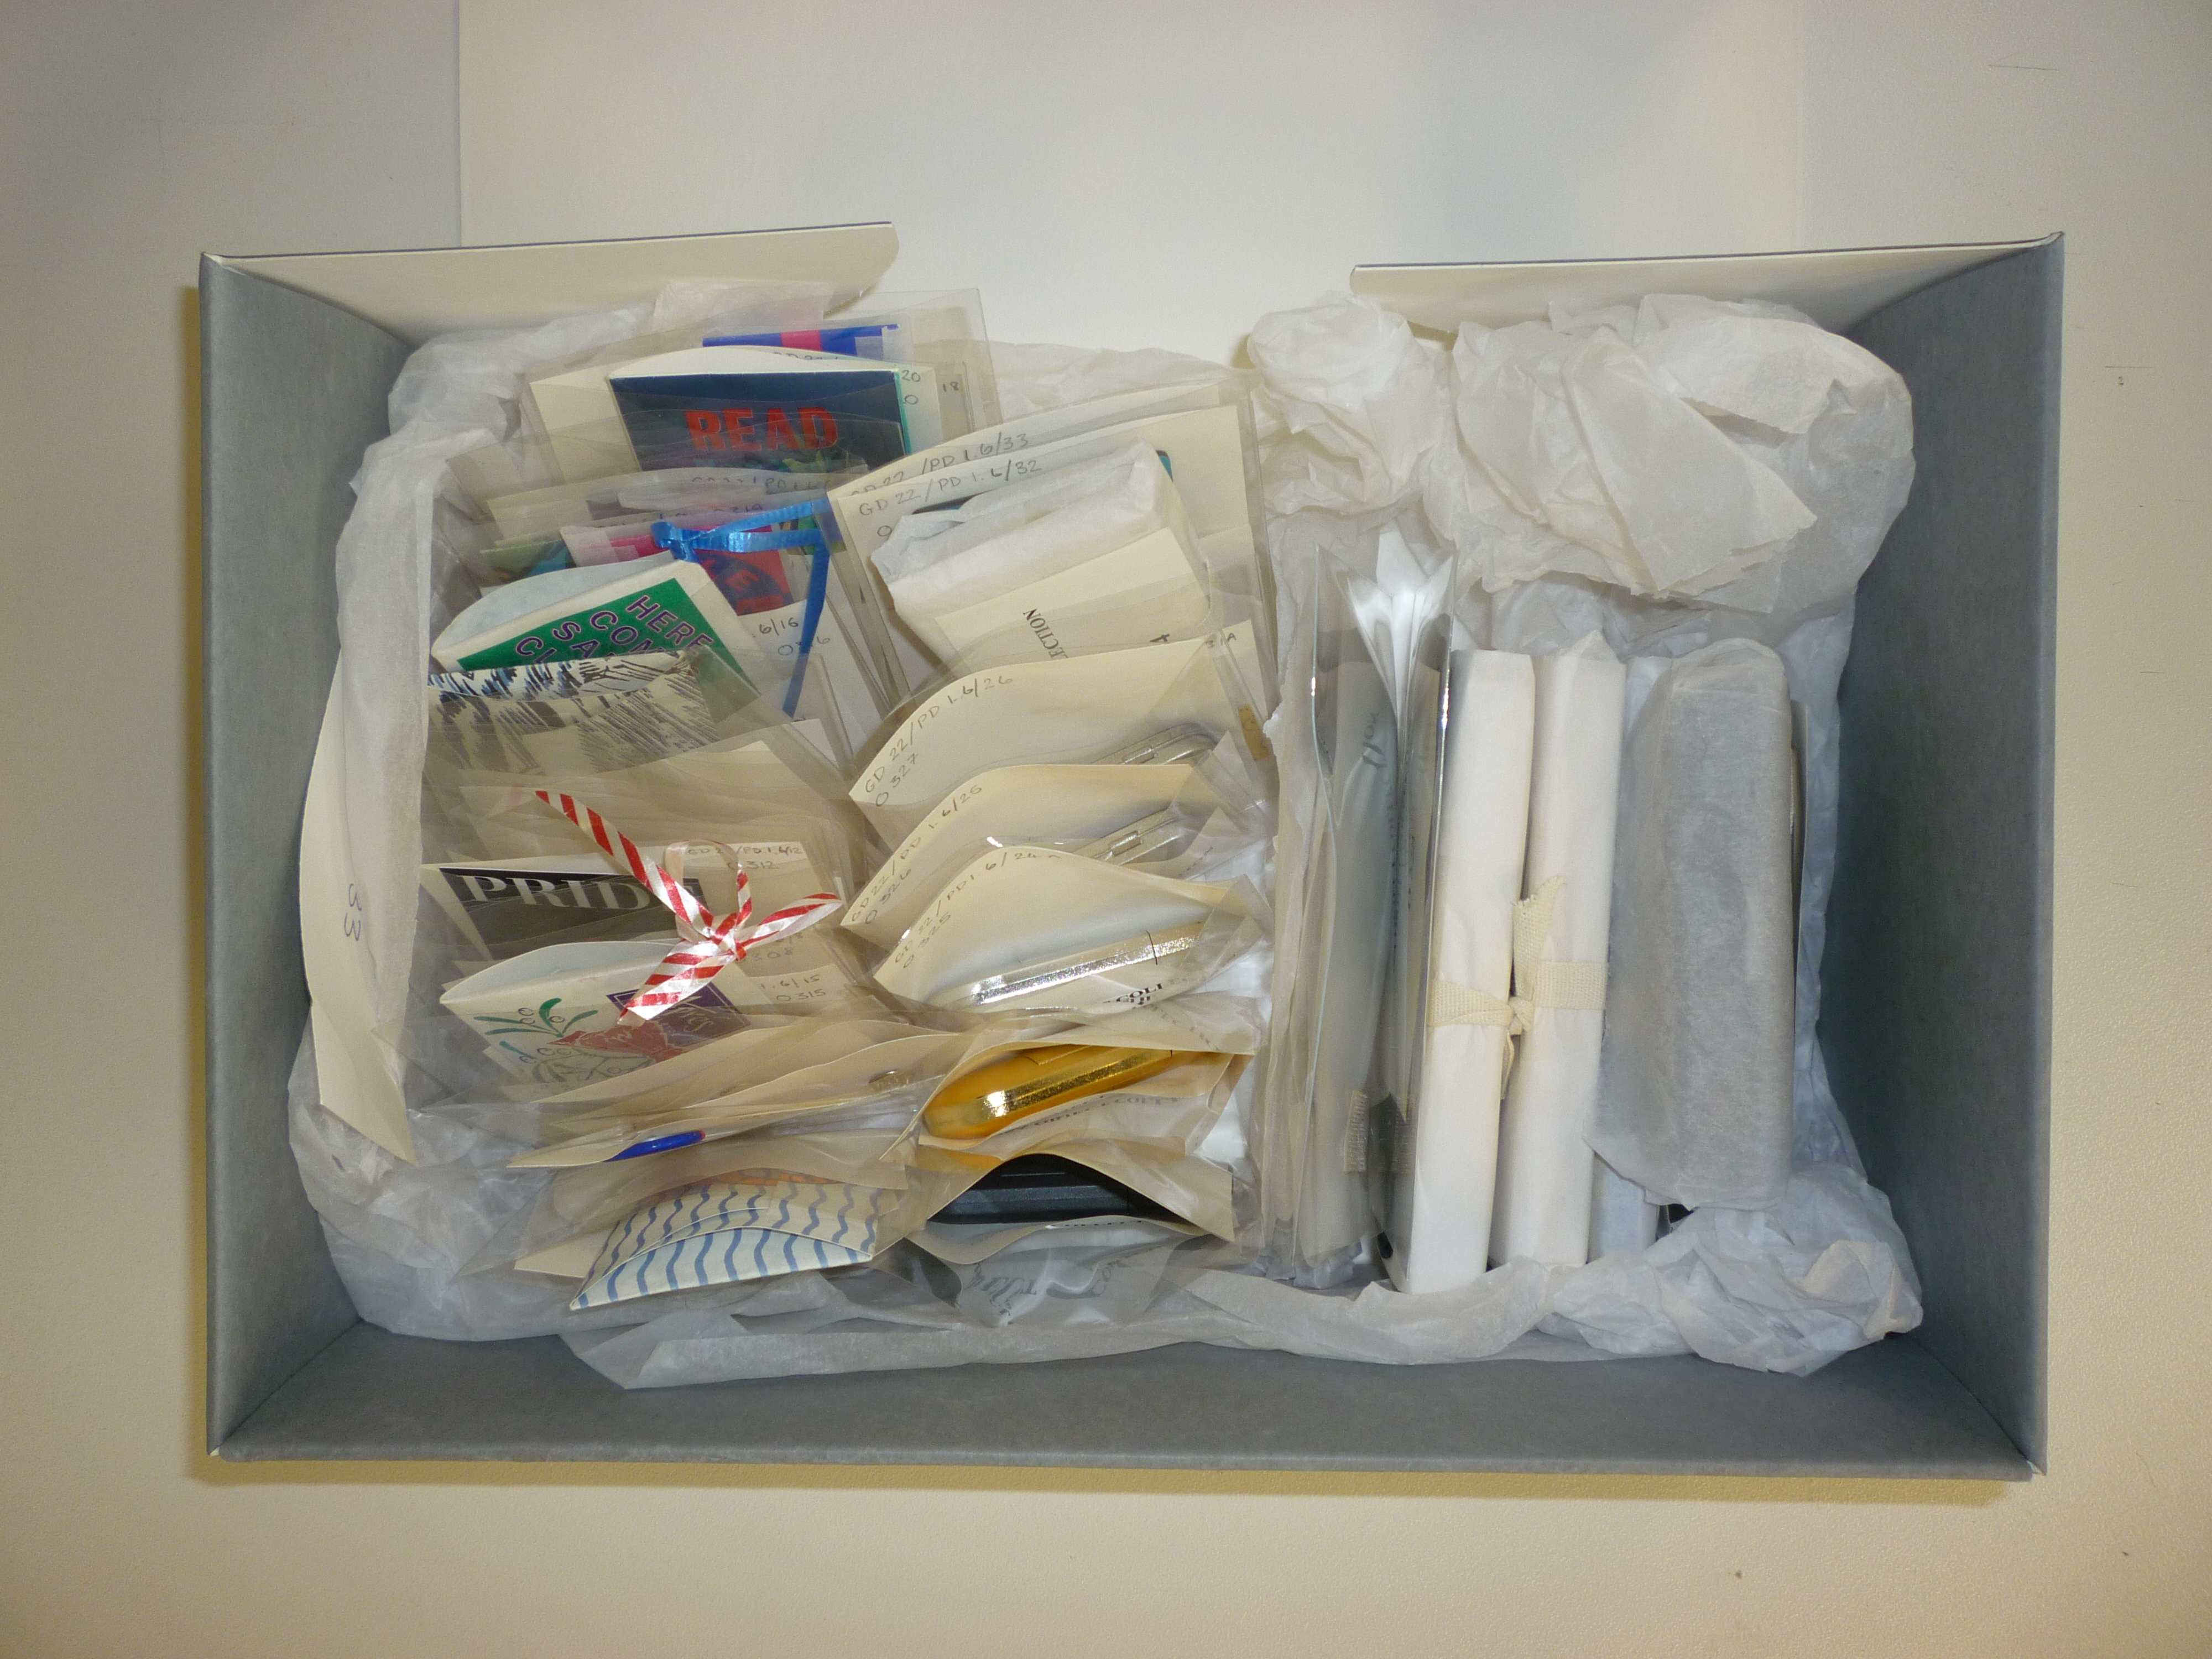 Box of plastic objects before treatment